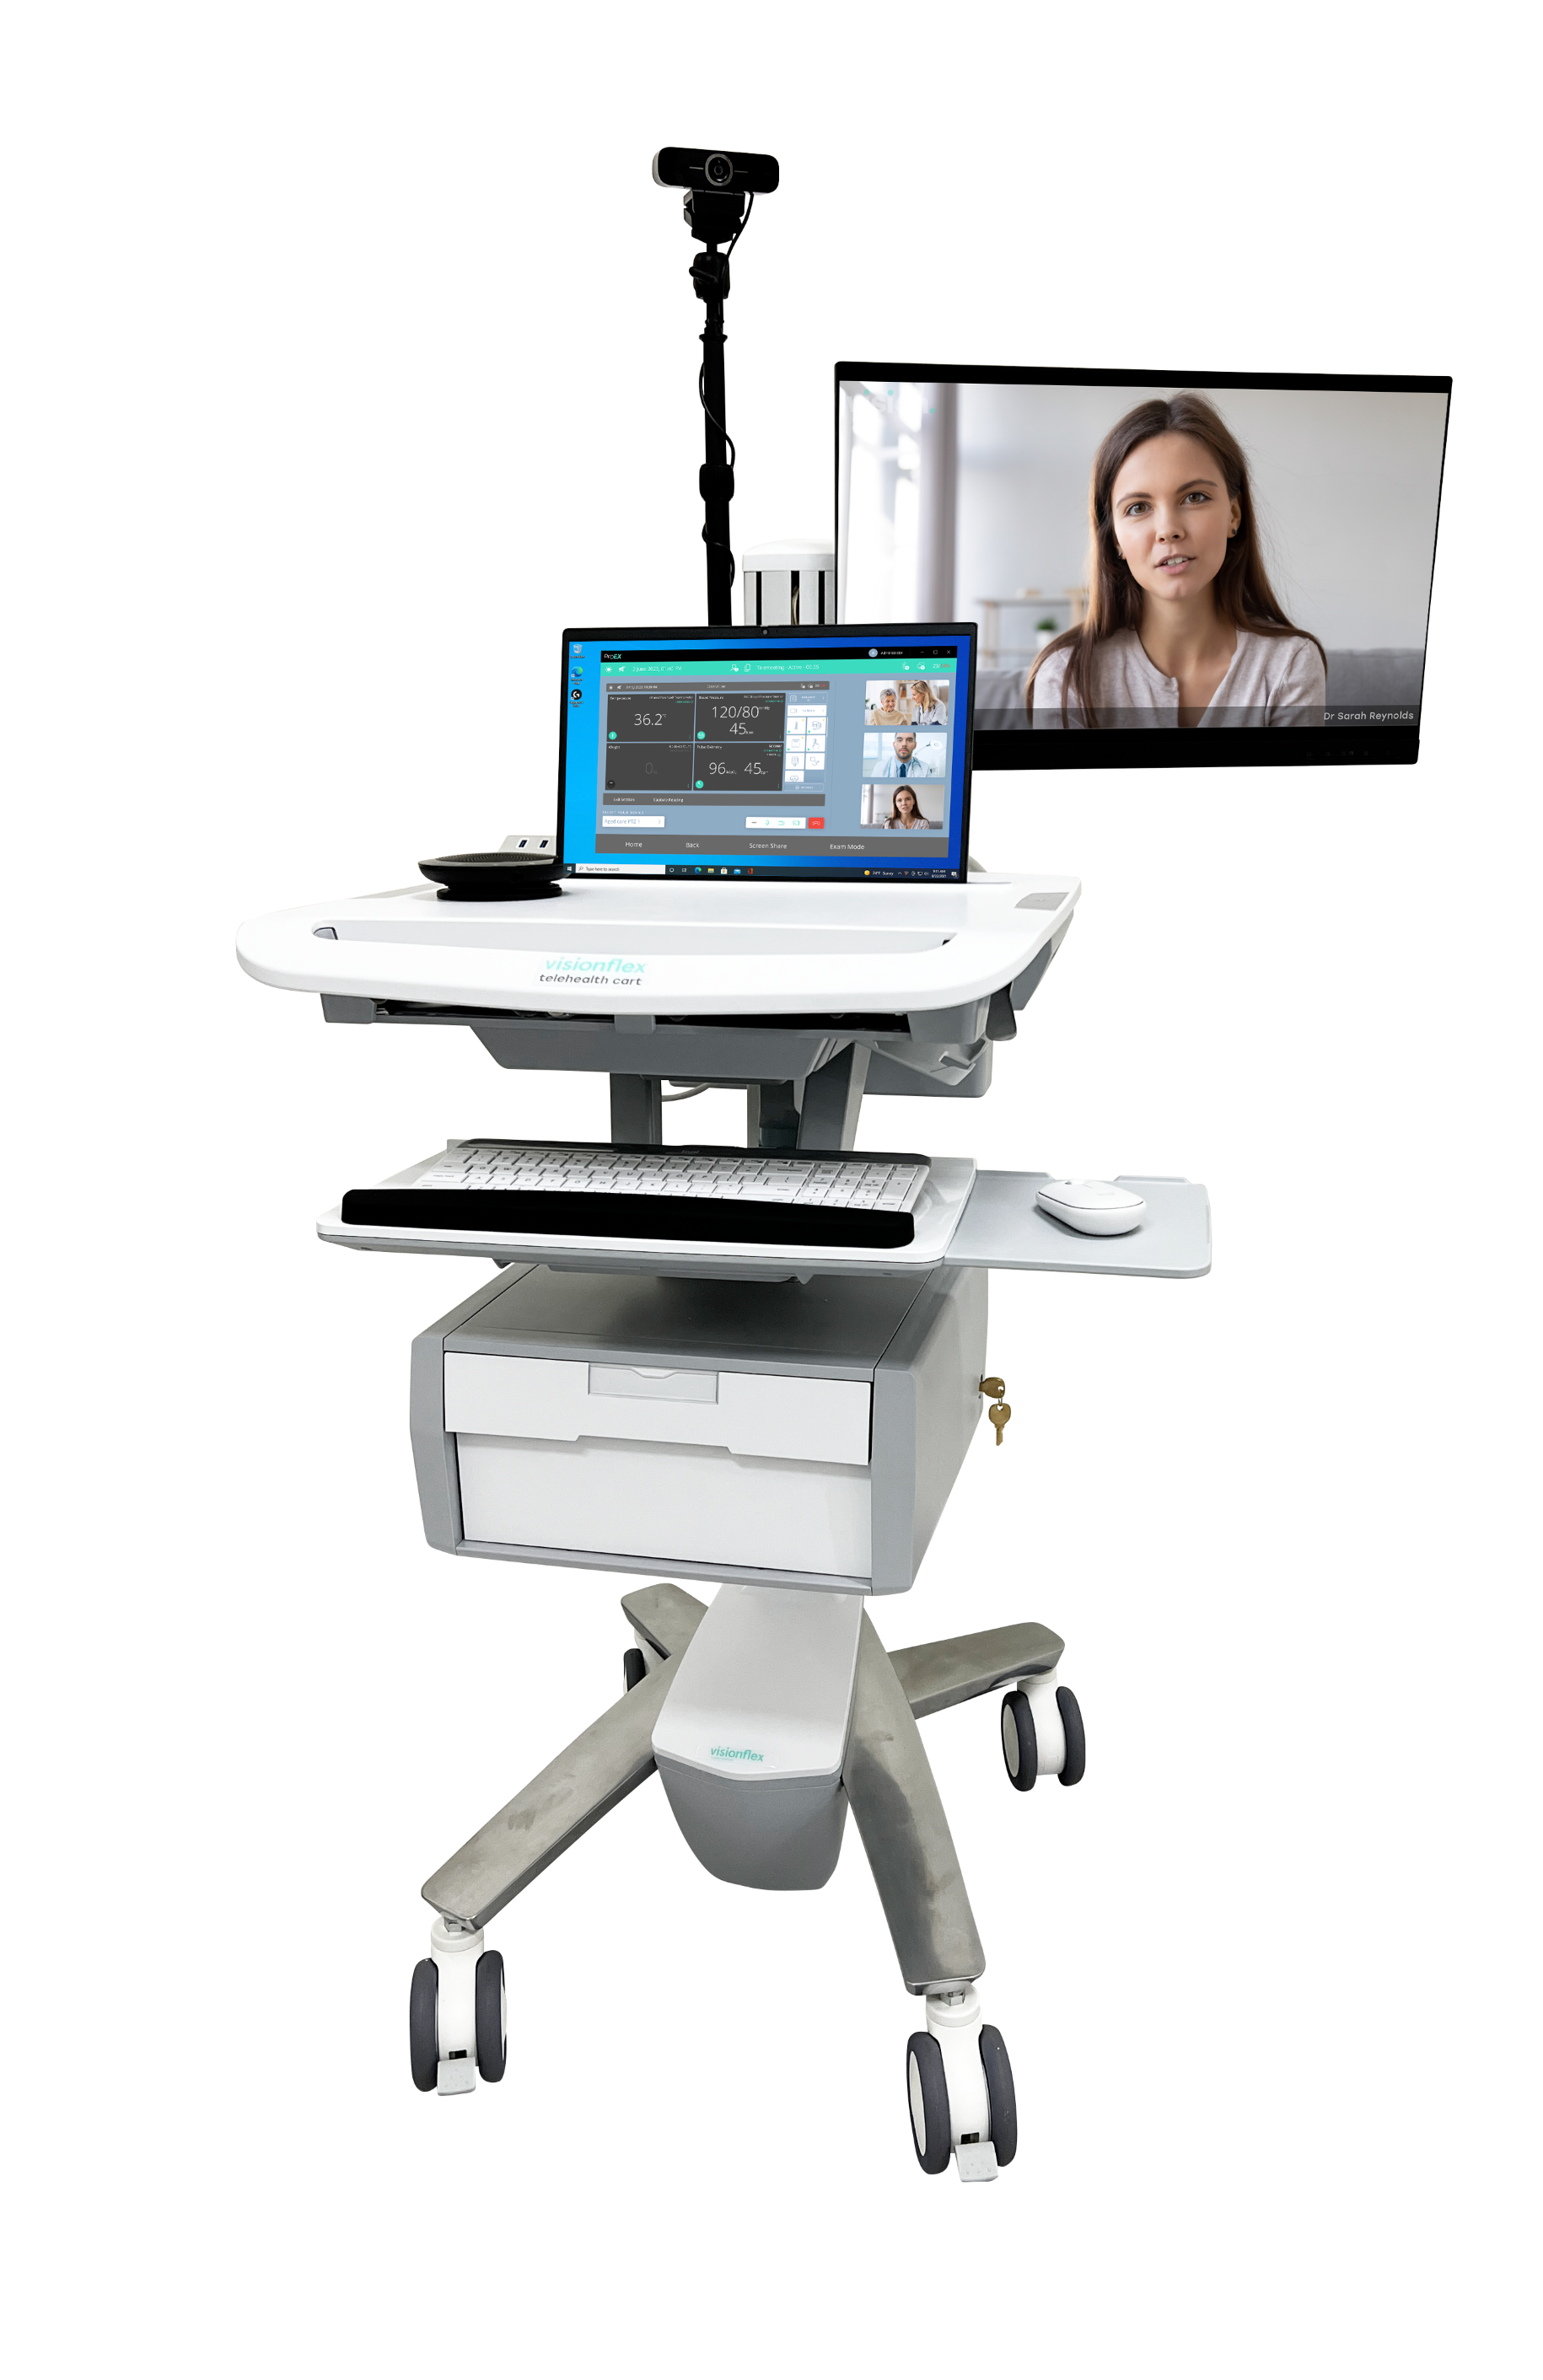 The telehealth carts make it possible for residents to have a consultation with their GP from the comfort of their homes